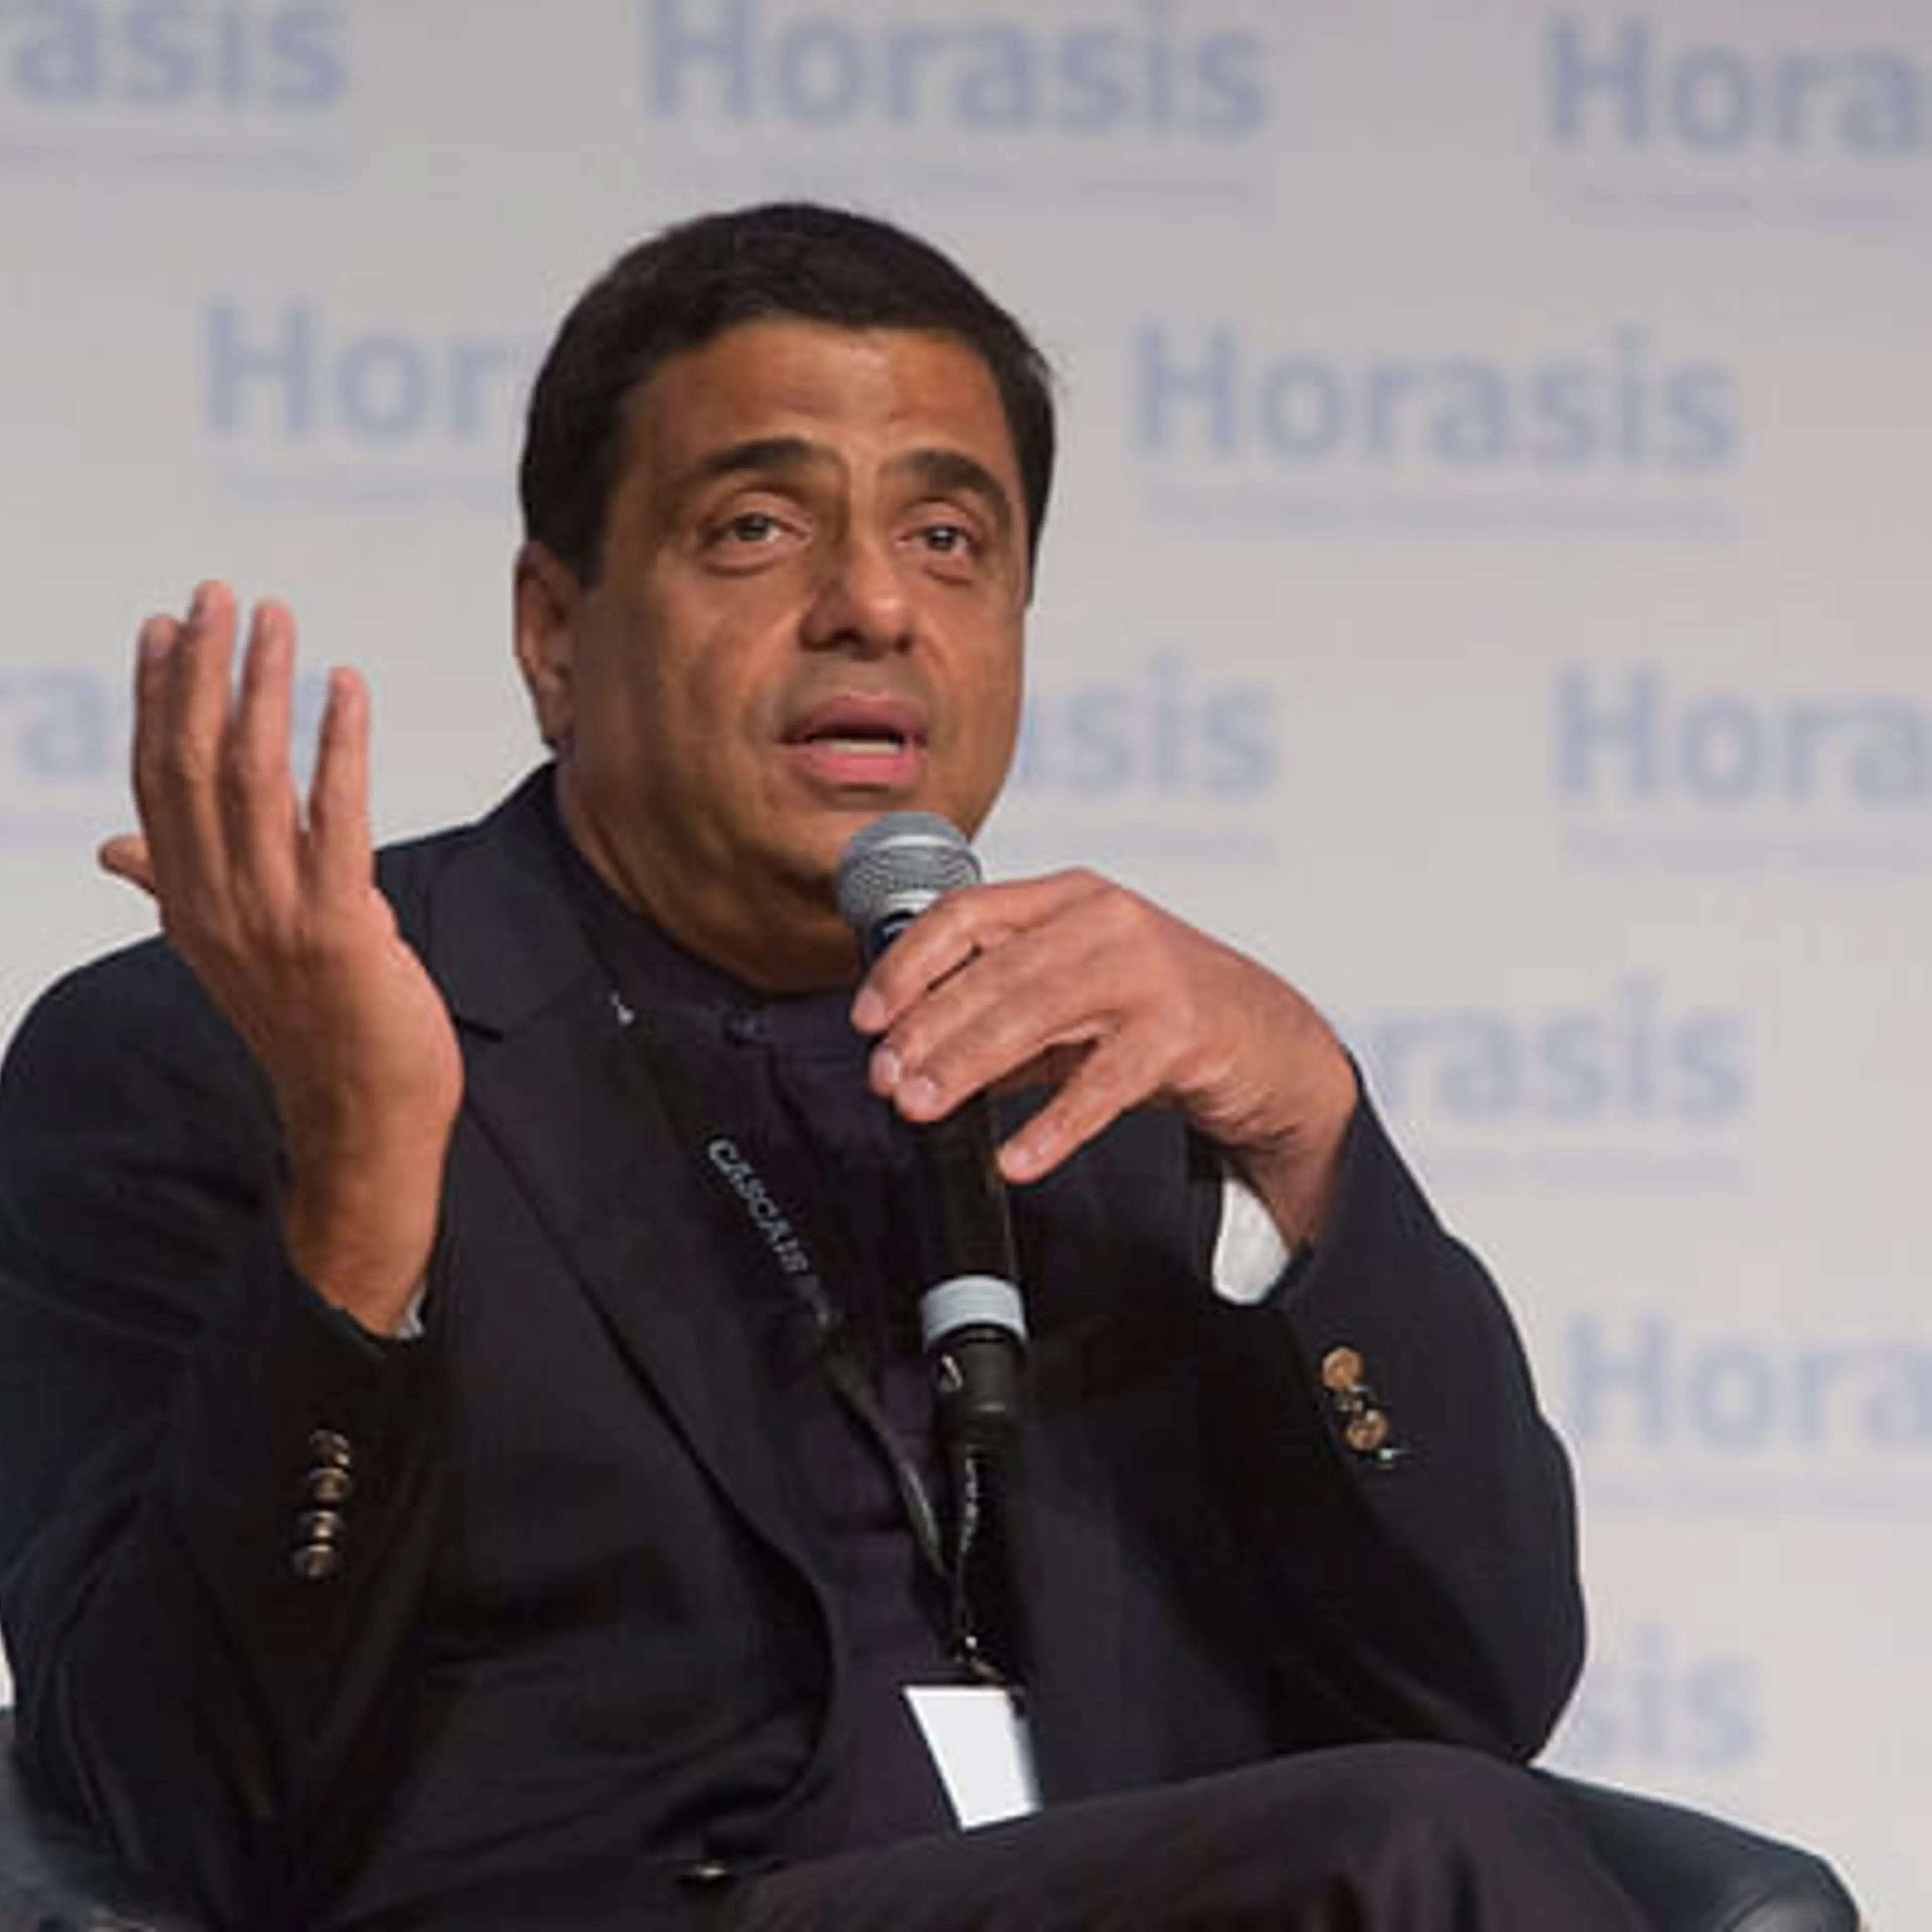 Toothbrushes to Billions: How Ronnie Screwvala Built a Rs.12,800 Crore Empire